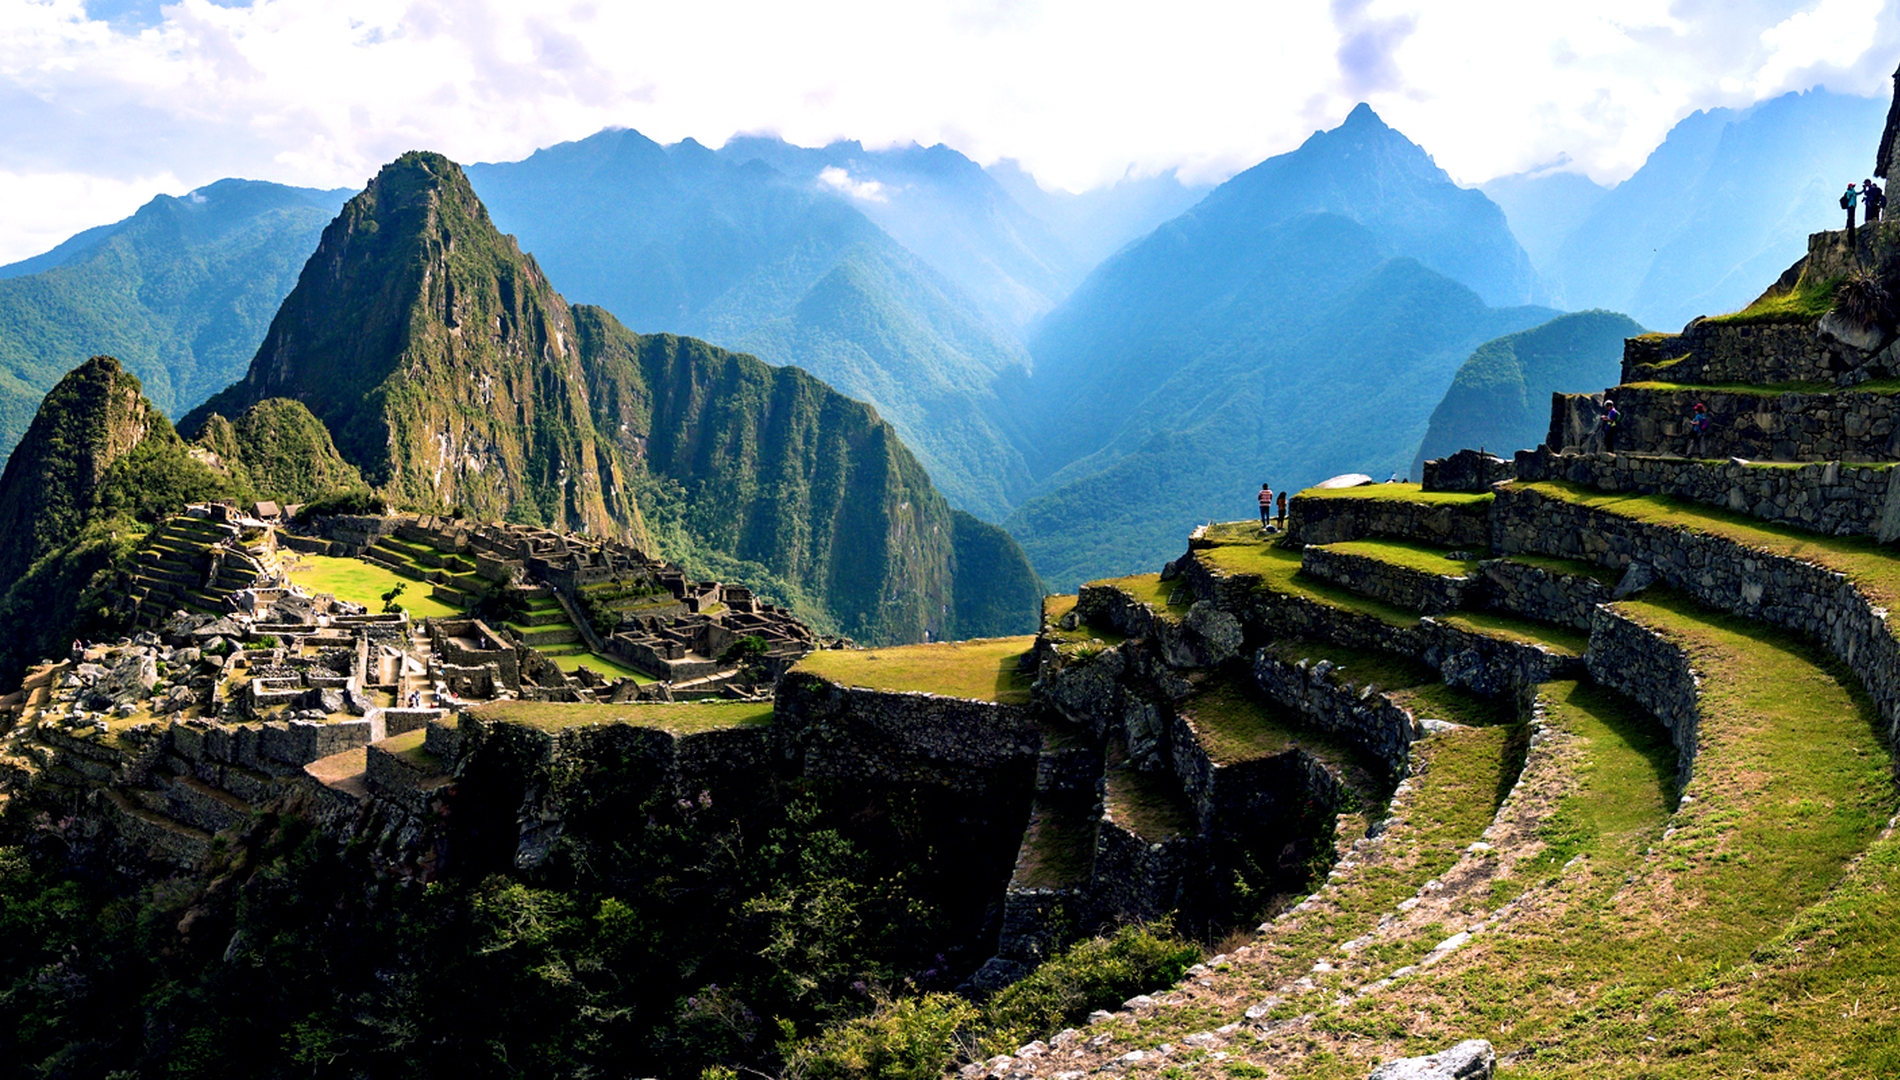 A panoramic view of the Machu Picchu archaeological site.